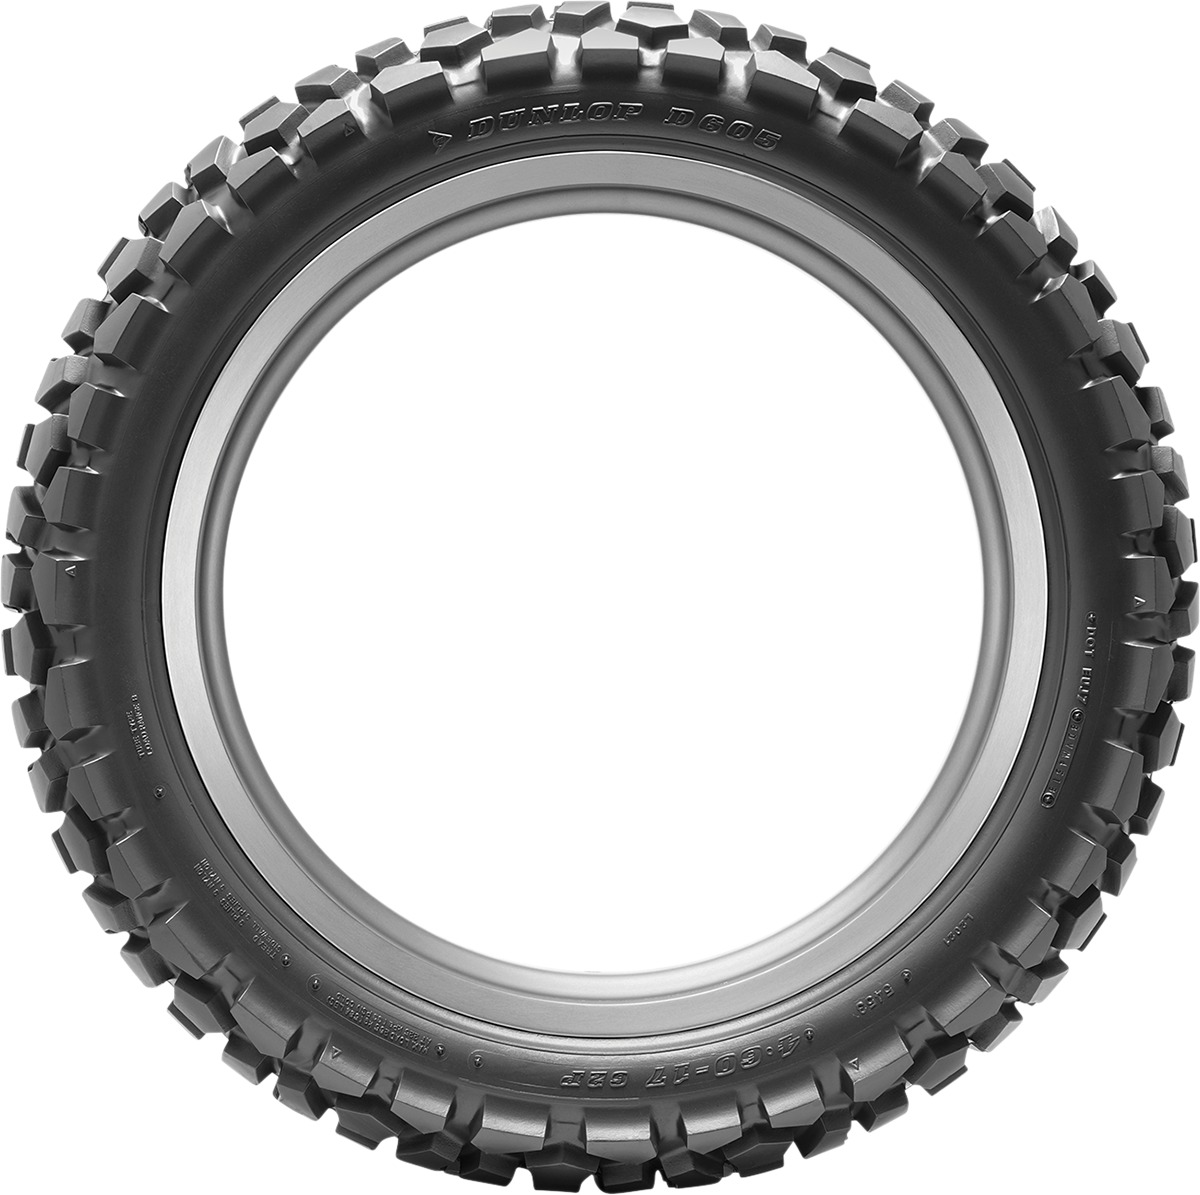 D605 Bias Rear Tire 4.60-18 Tube Type - Click Image to Close